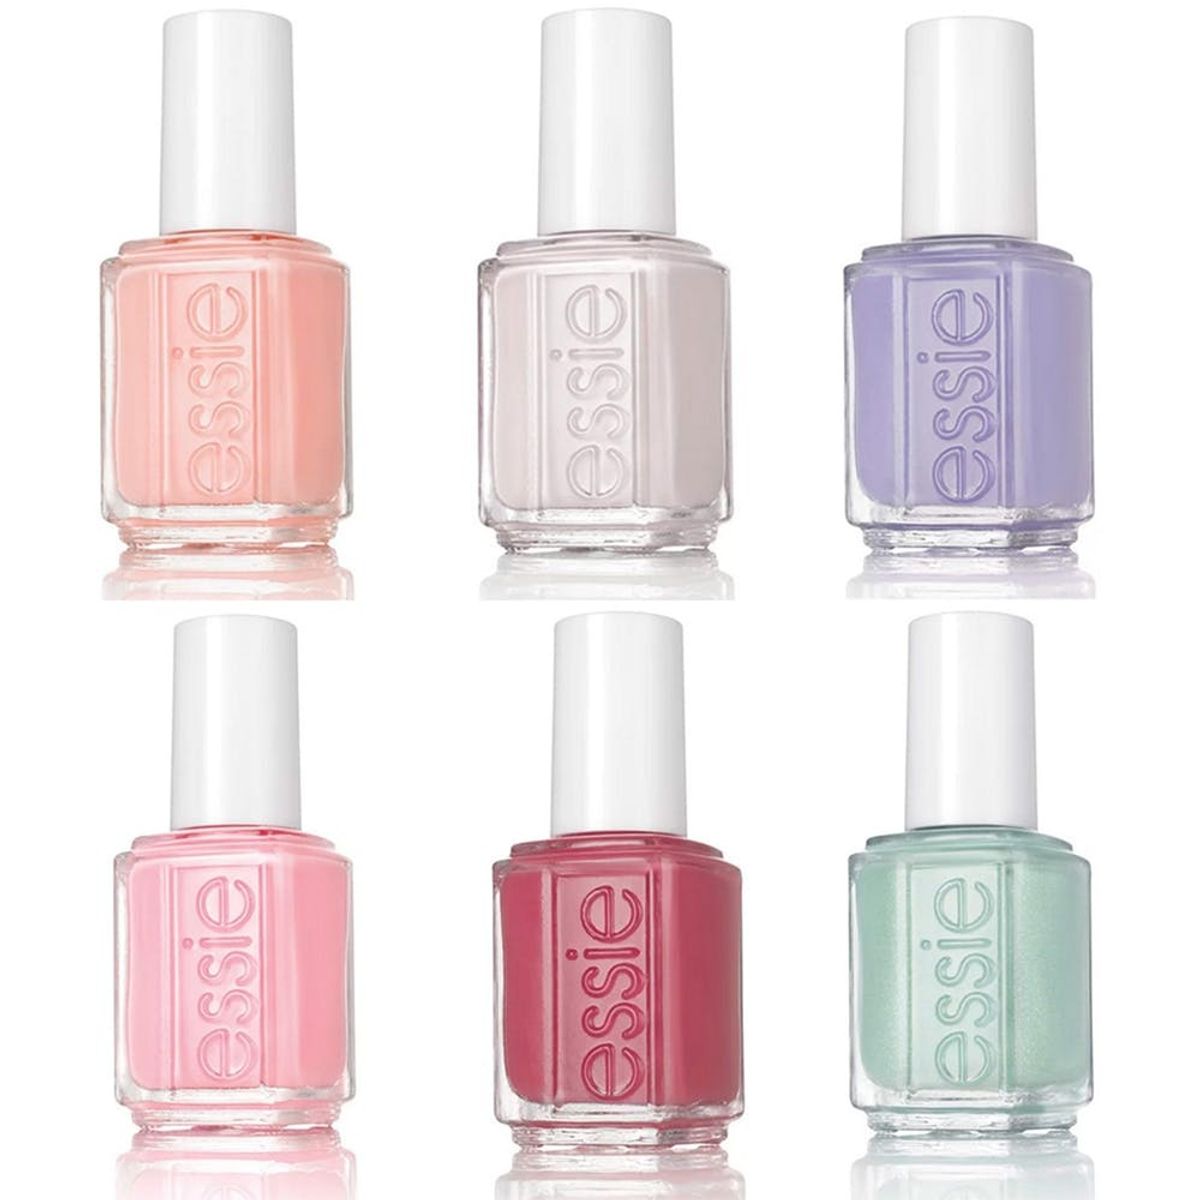 Essie Just Launched an Epic Bridal Collection